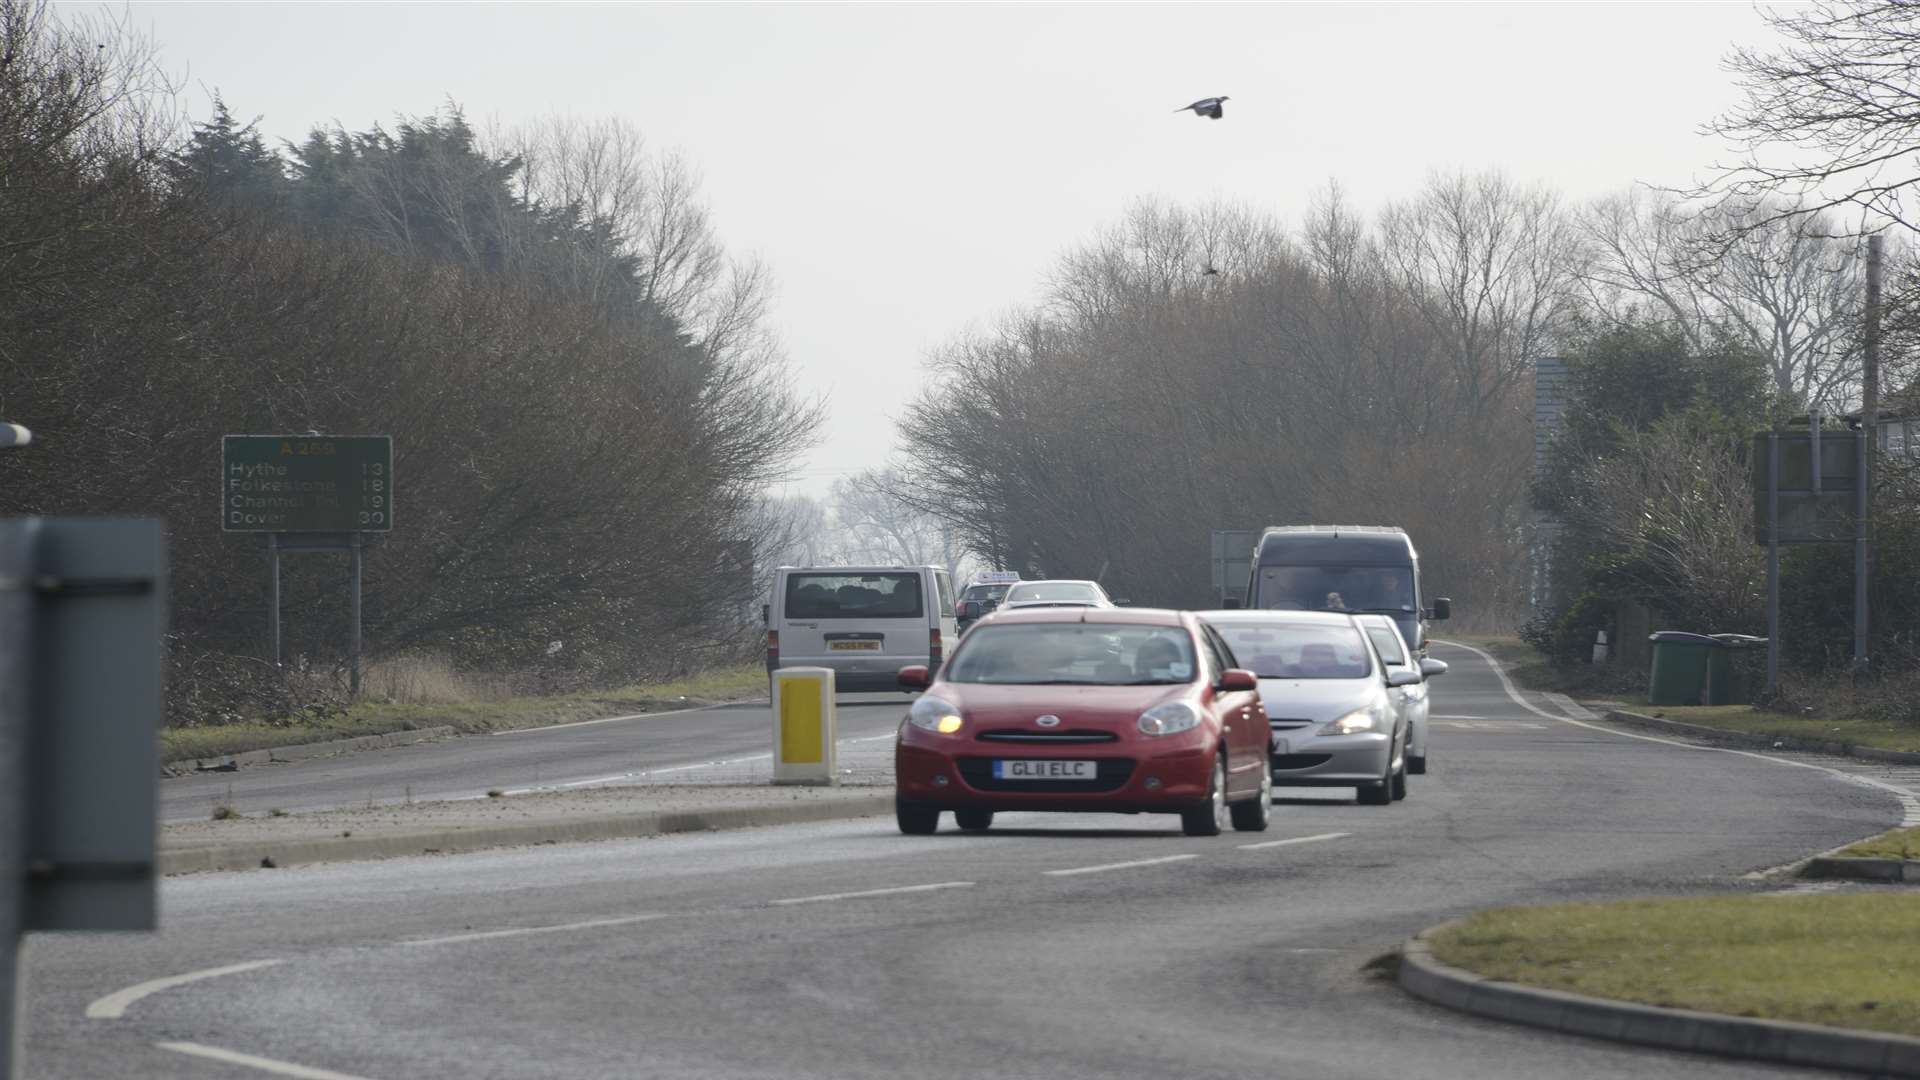 The crash happened on the A259